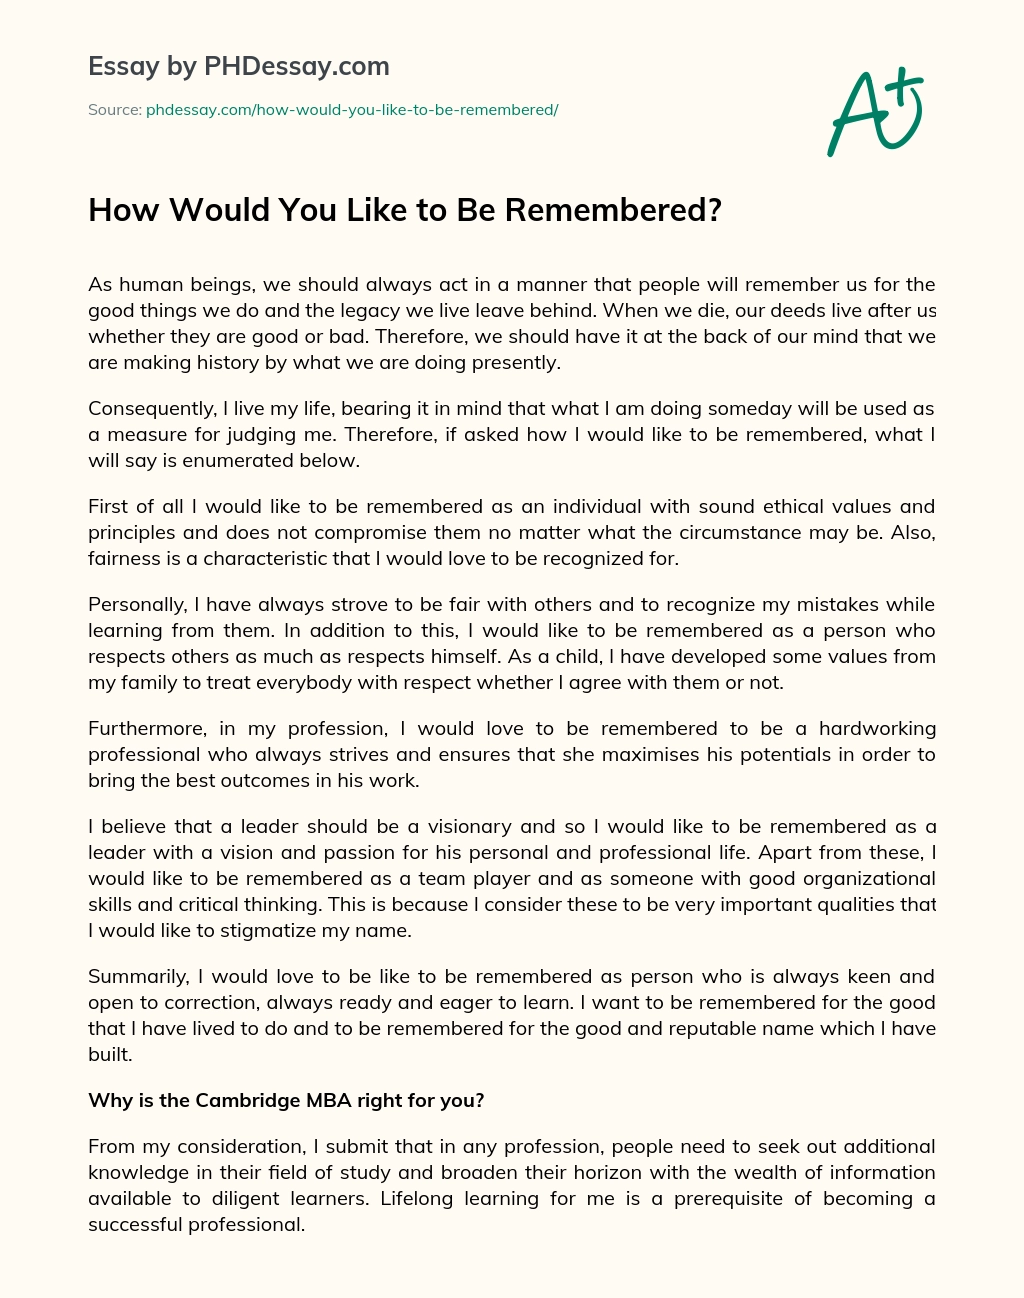 How Would You Like to Be Remembered? essay